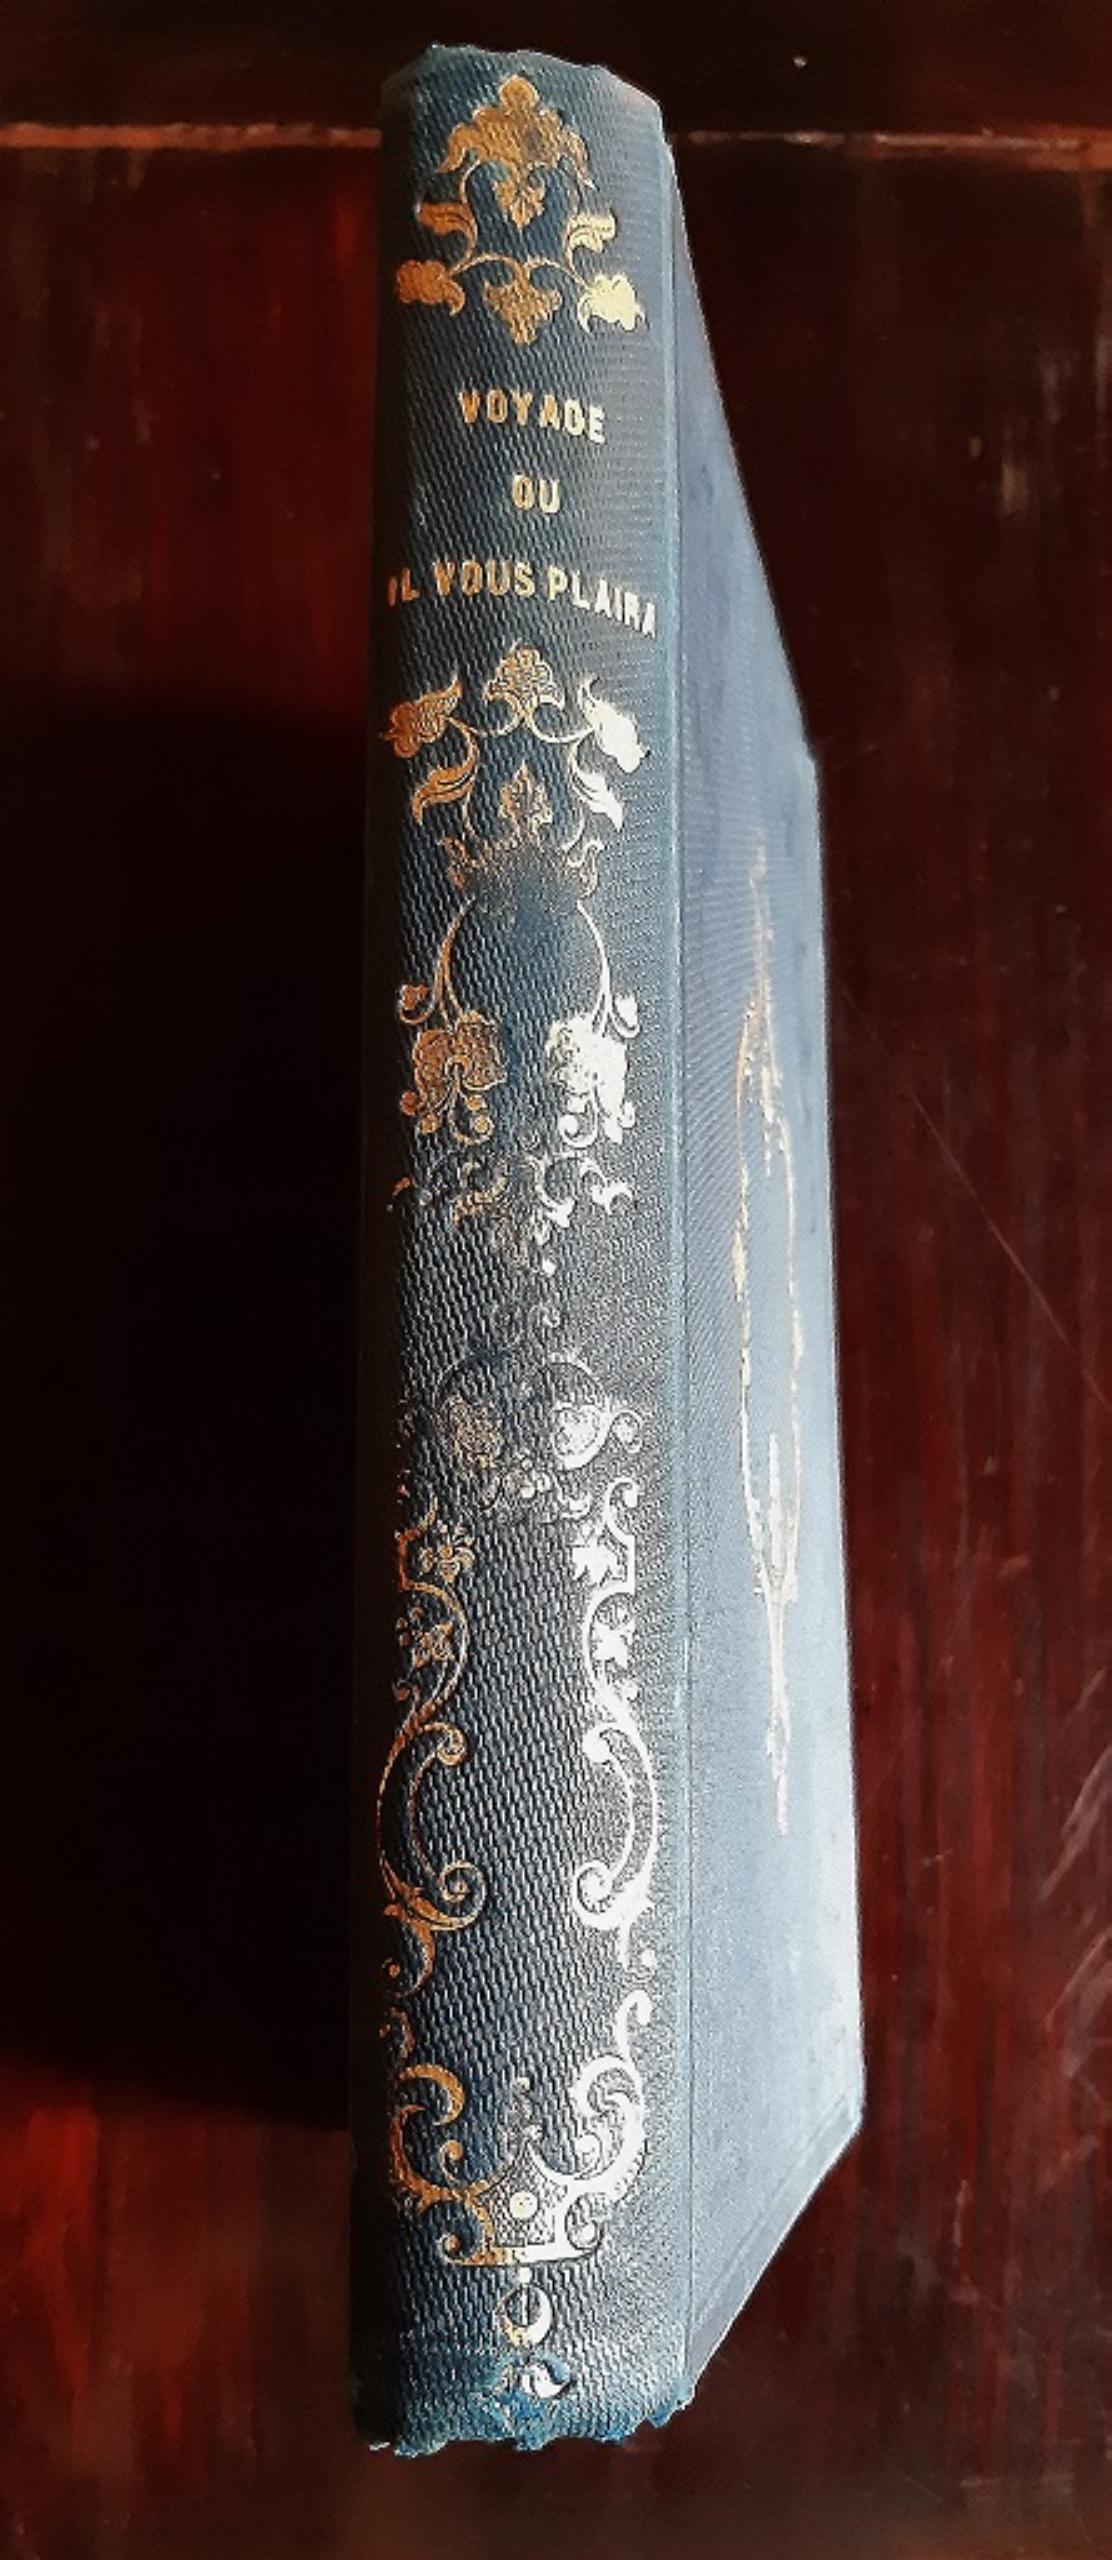 Voyage où il Vous Plaira - Rare Book Illustrated by Tony Johannot - 1843 For Sale 9